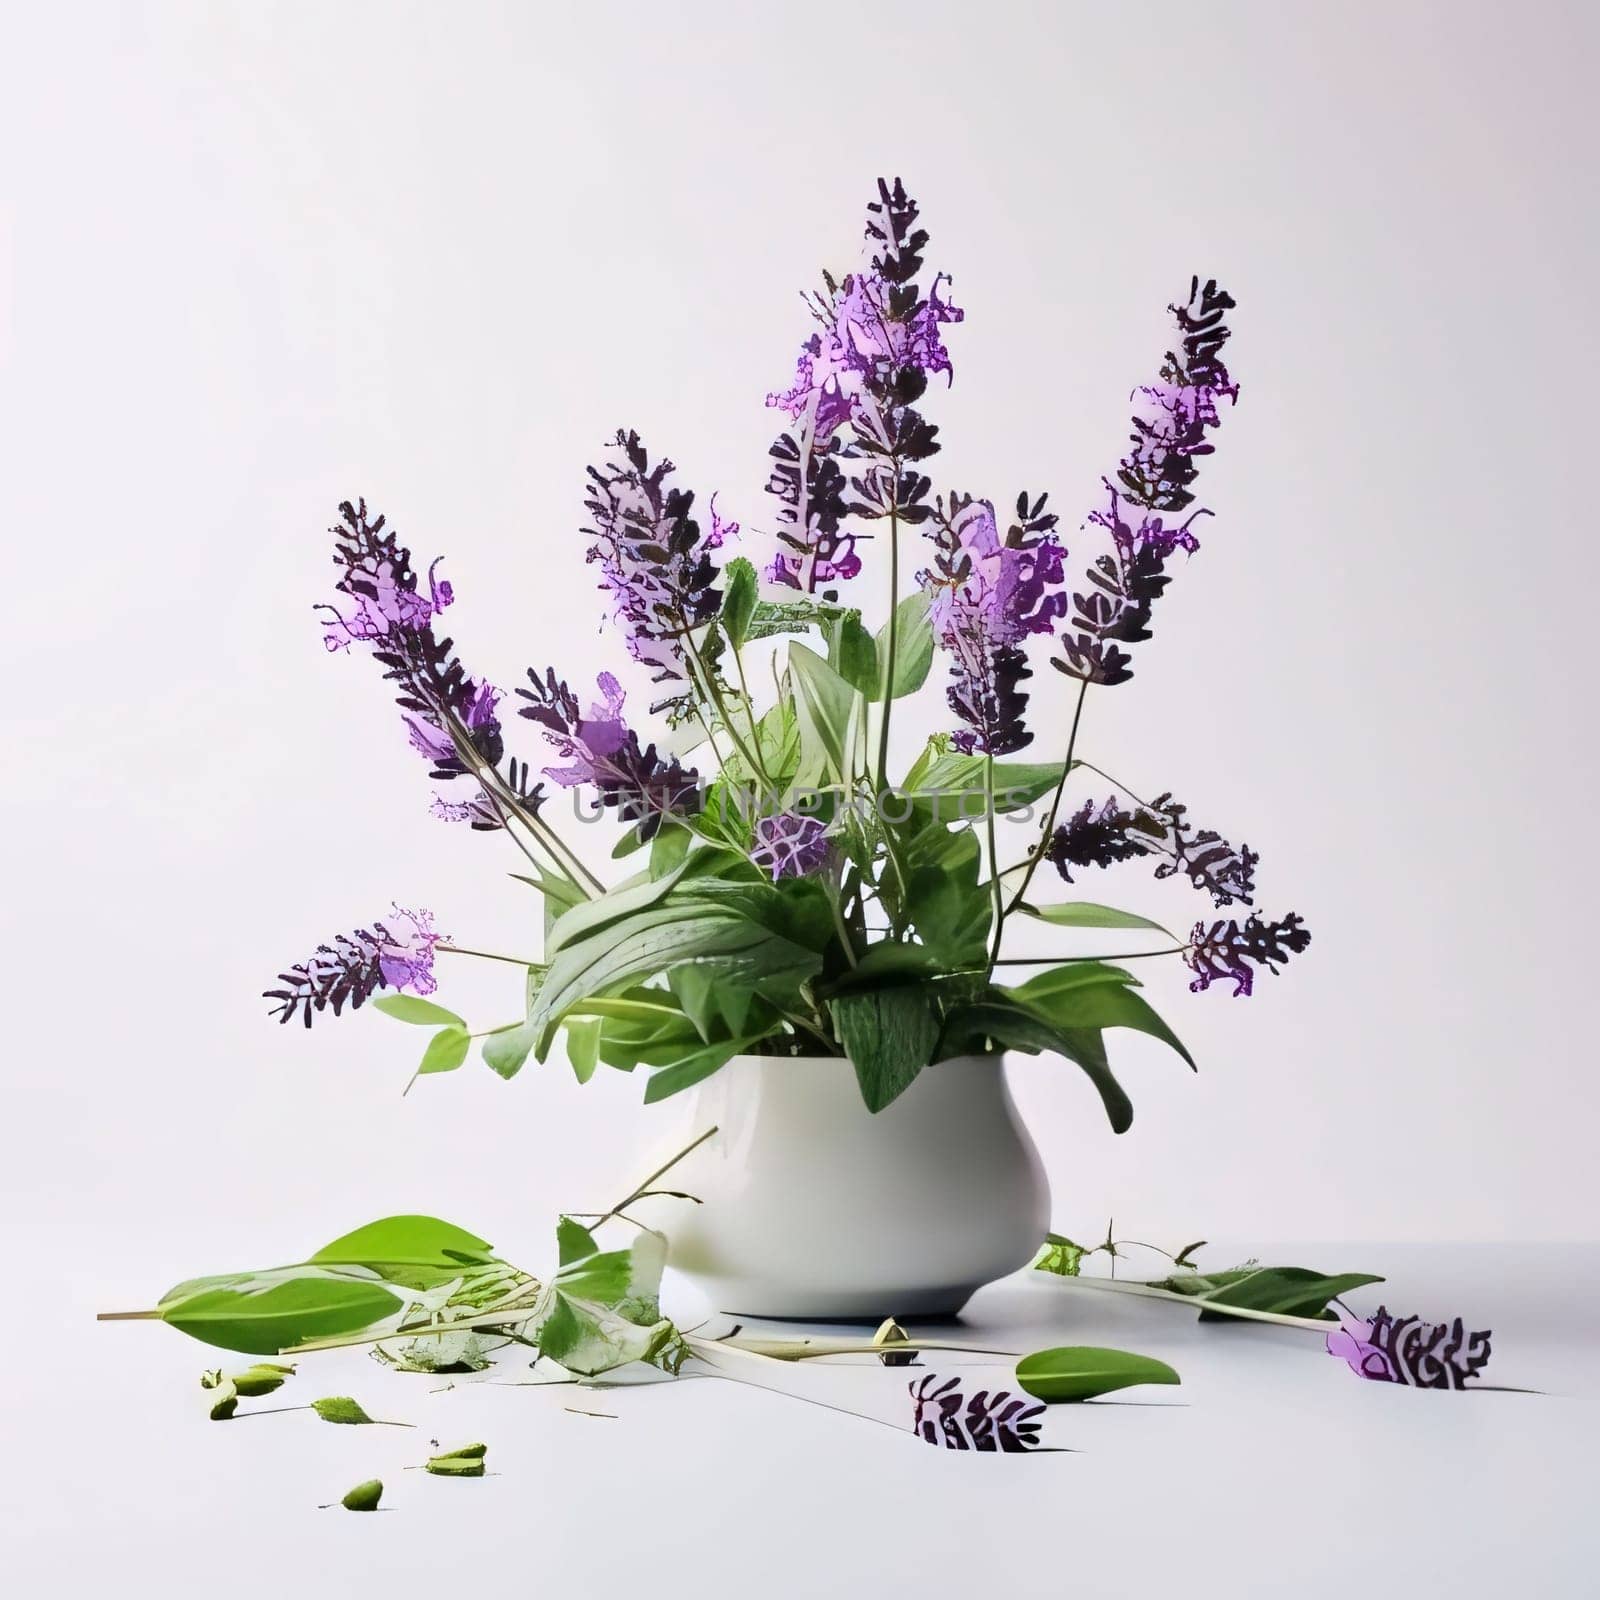 Bouquet of lilac in a white vase on a white background. Flowering flowers, a symbol of spring, new life. A joyful time of nature awakening to life.